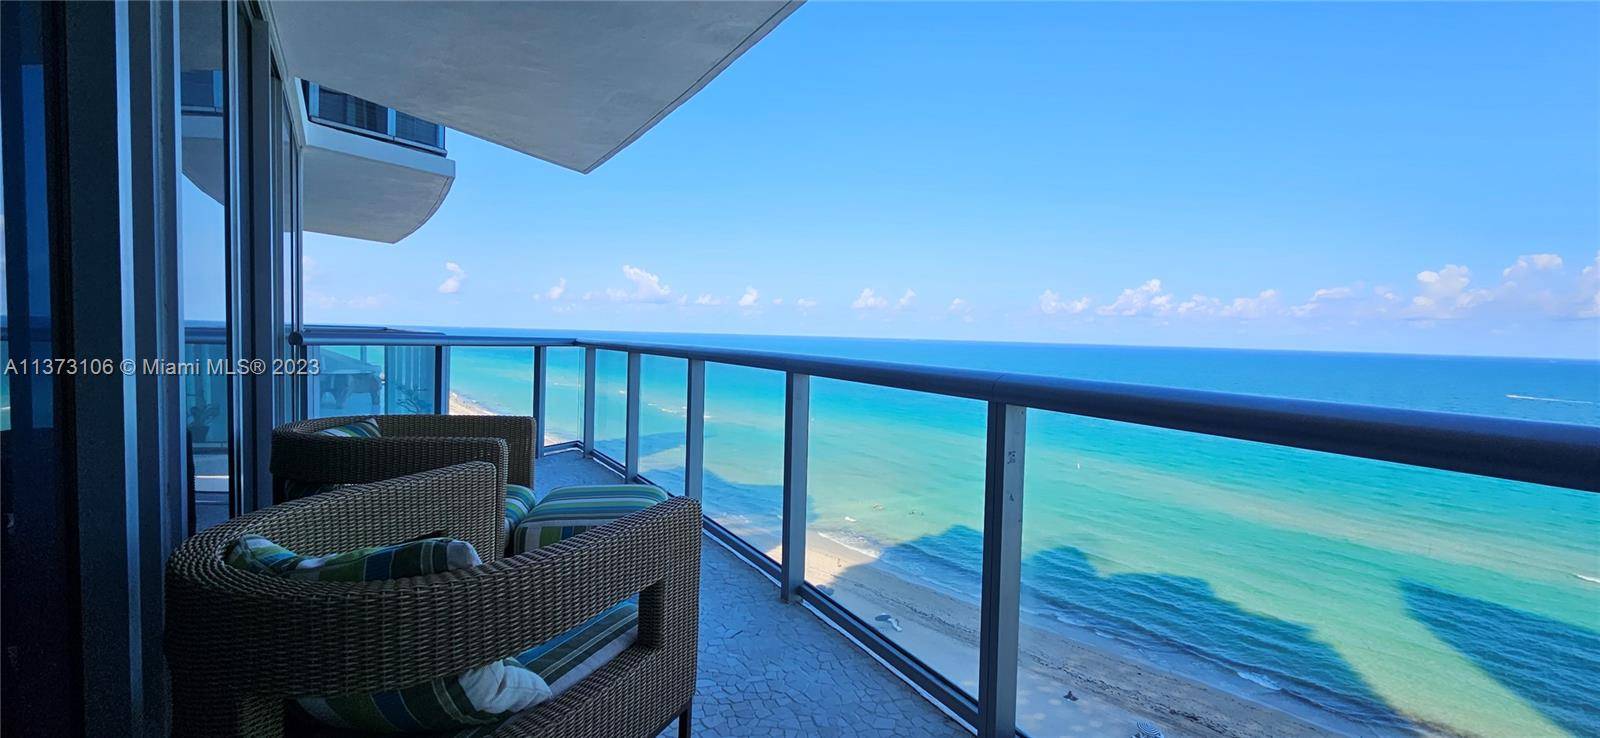 Wake up to mesmerizing direct ocean views in this totally upgraded 1 bedroom 1.